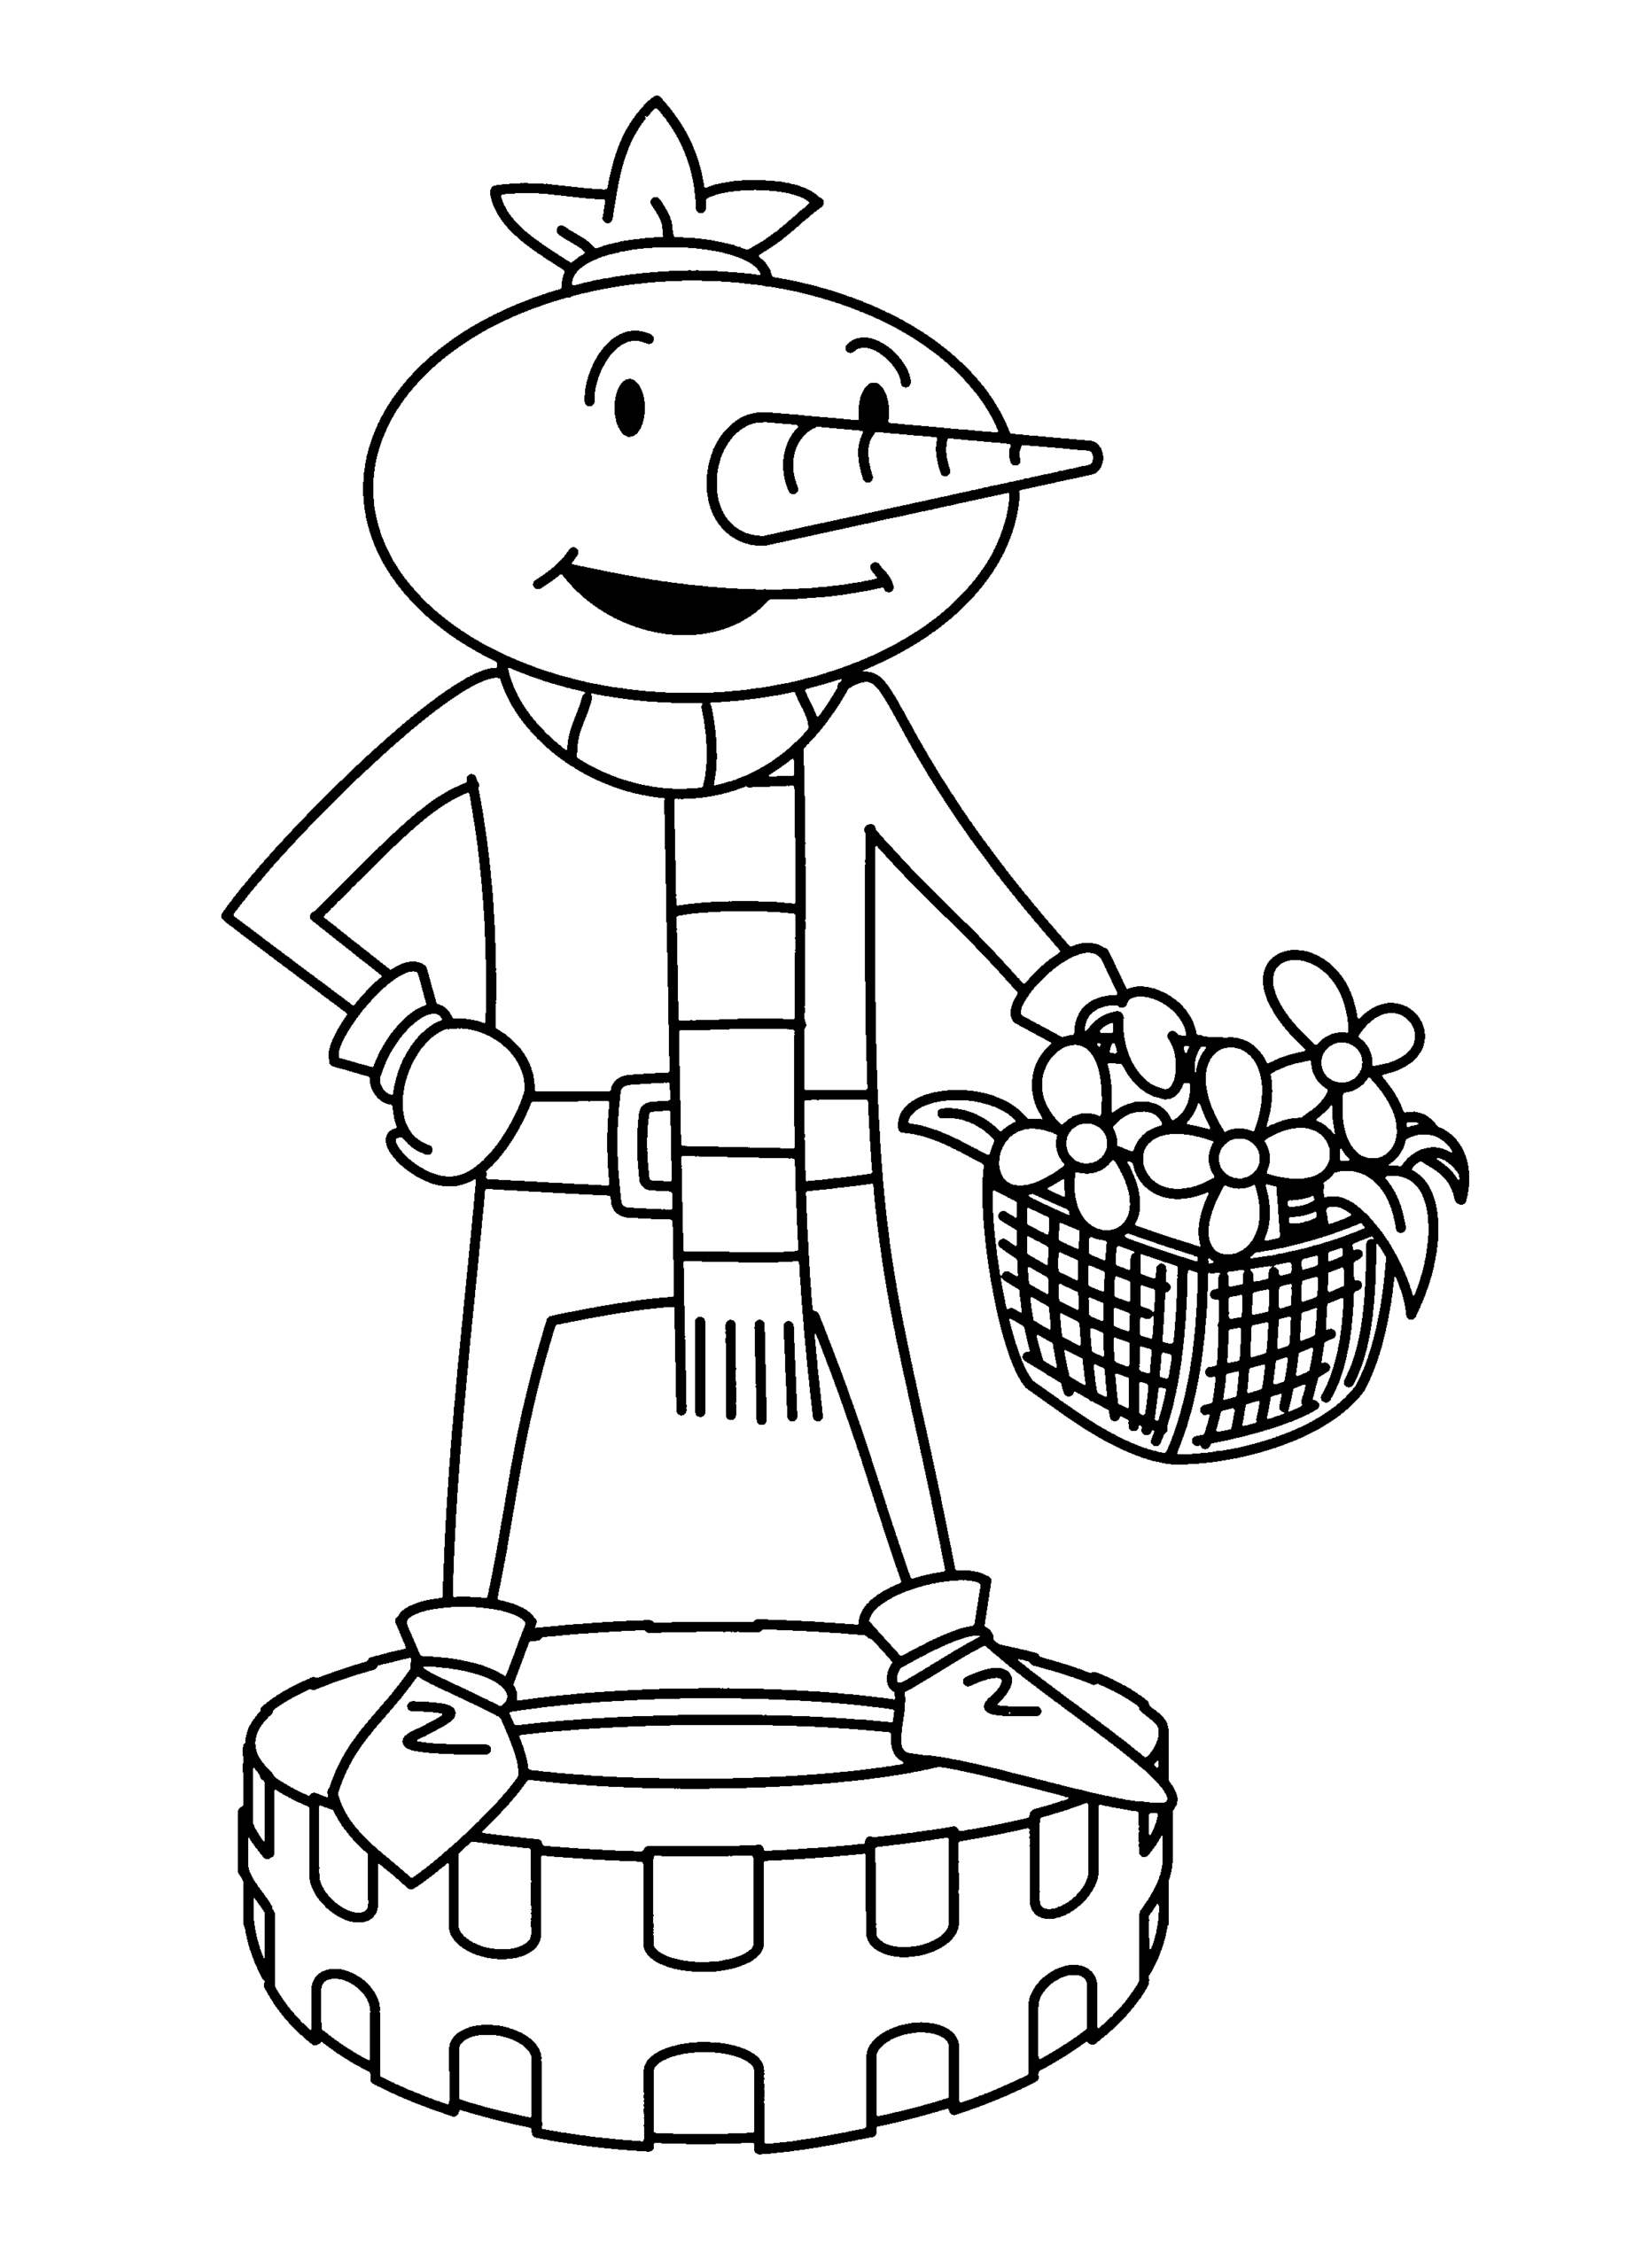 Bob the Builder Coloring Pages TV Film bob the builder 62 Printable 2020 01084 Coloring4free